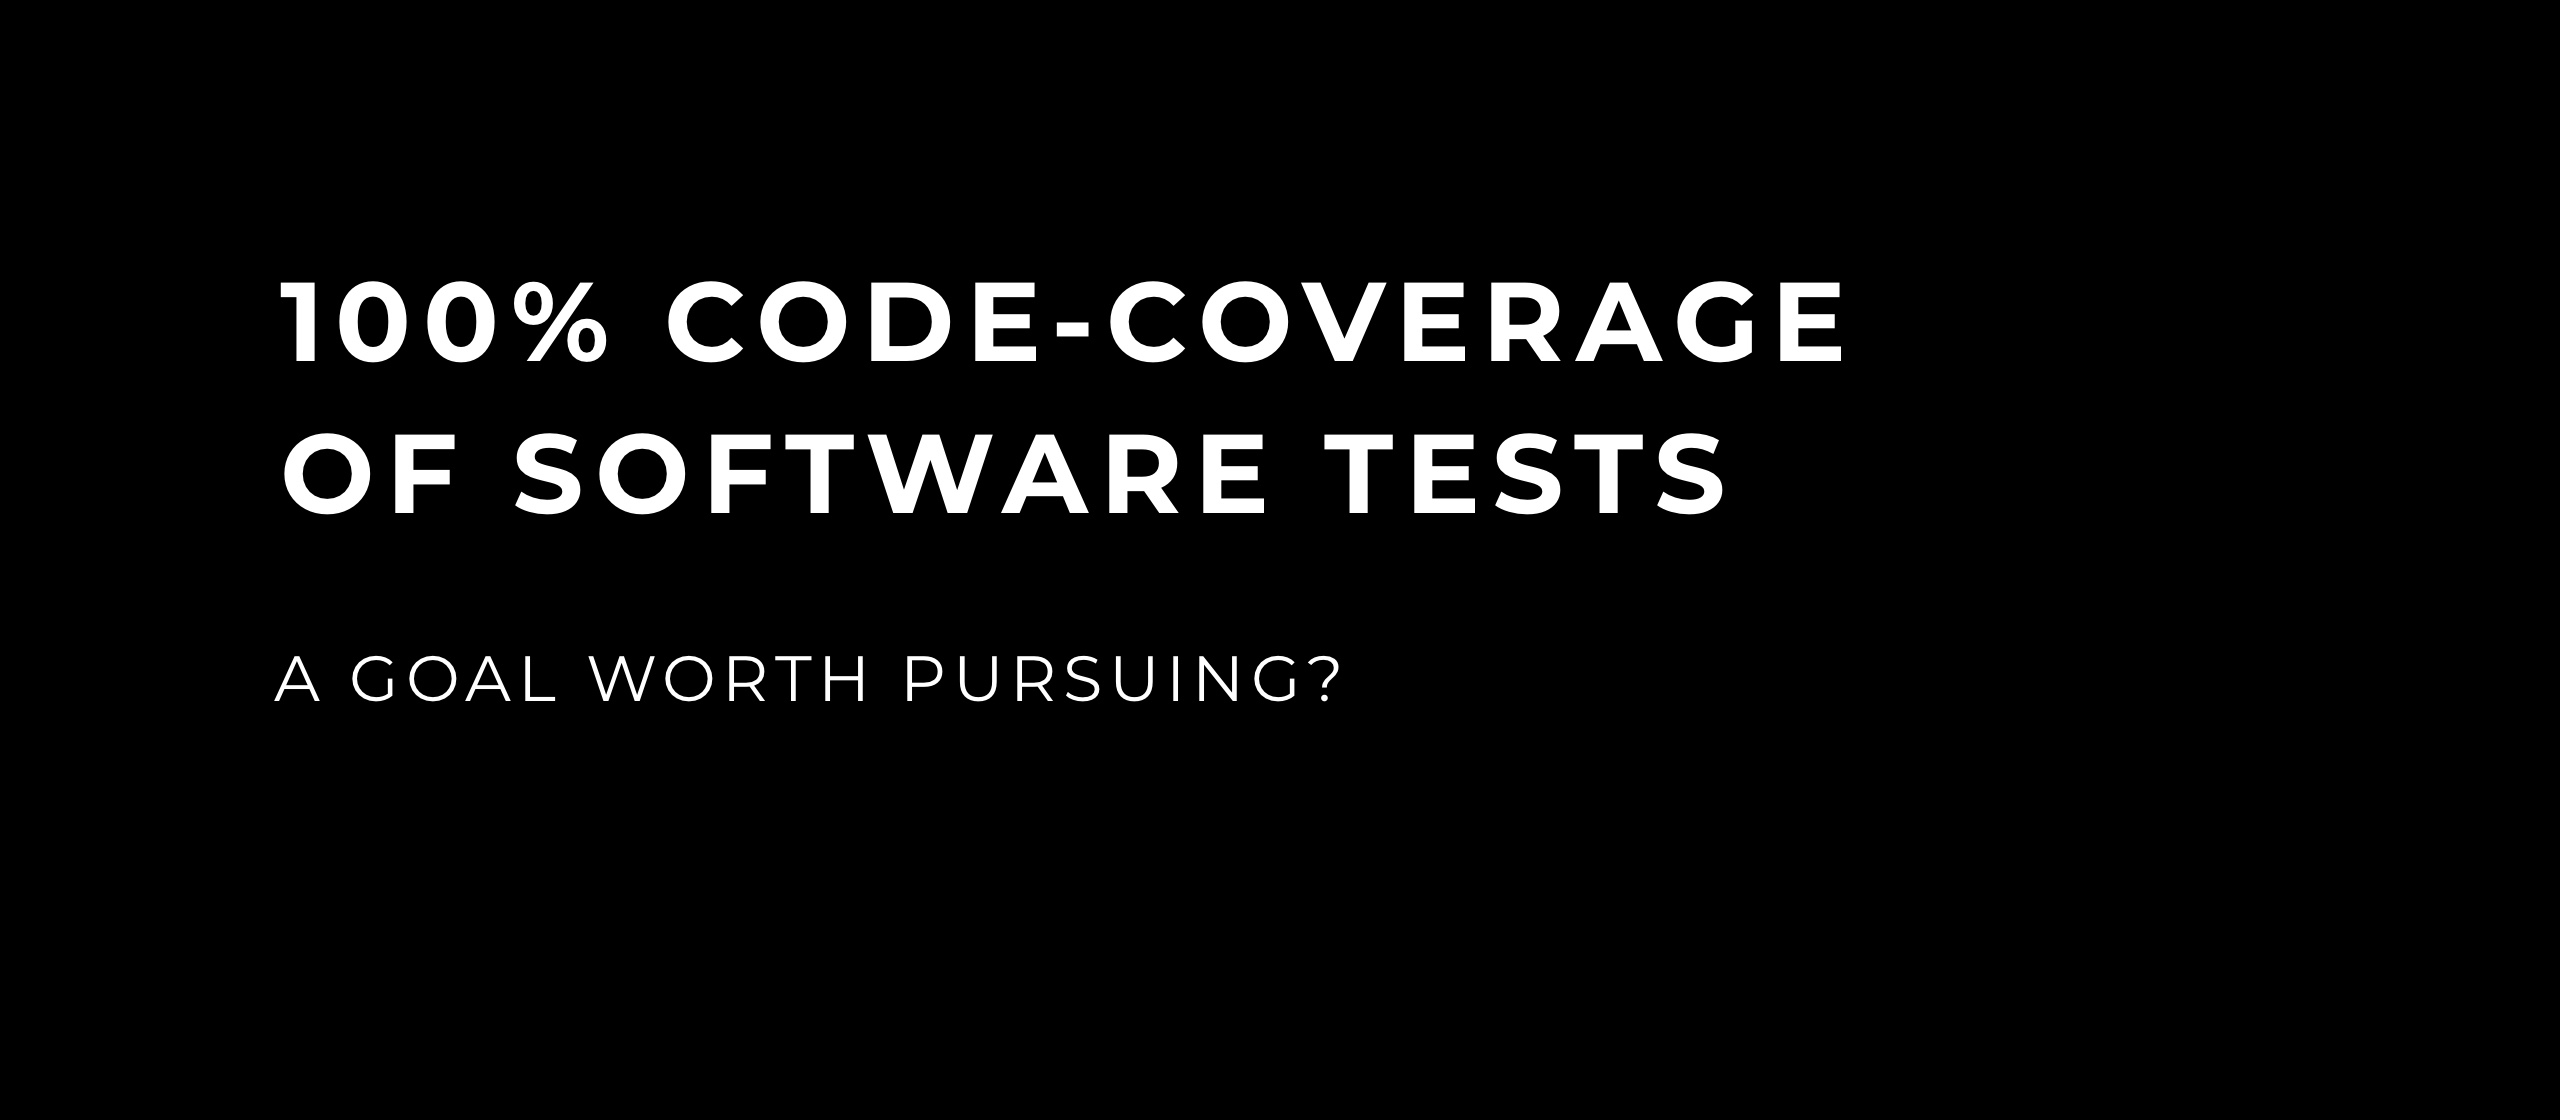 let’s dev Blog | 100% code coverage in software testing - a reasonable goal?